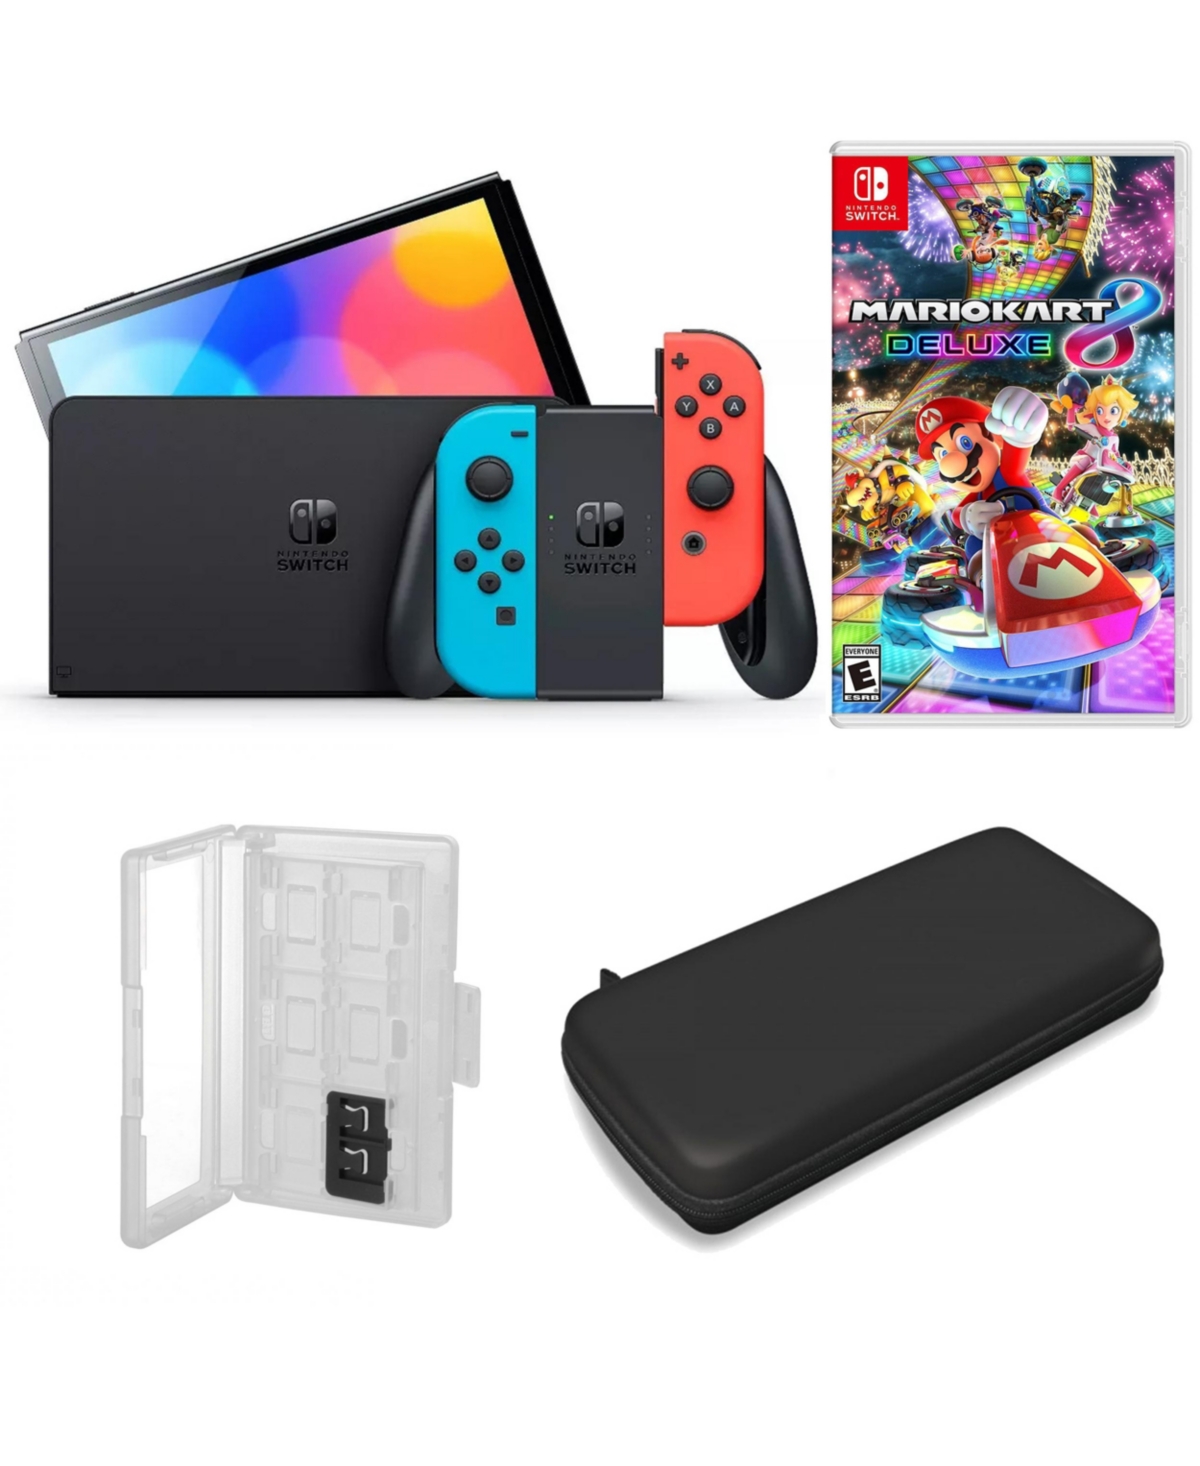 UPC 658580286002 product image for Nintendo Switch Oled in Neon with Super Mario Kart 8 & Accessories | upcitemdb.com